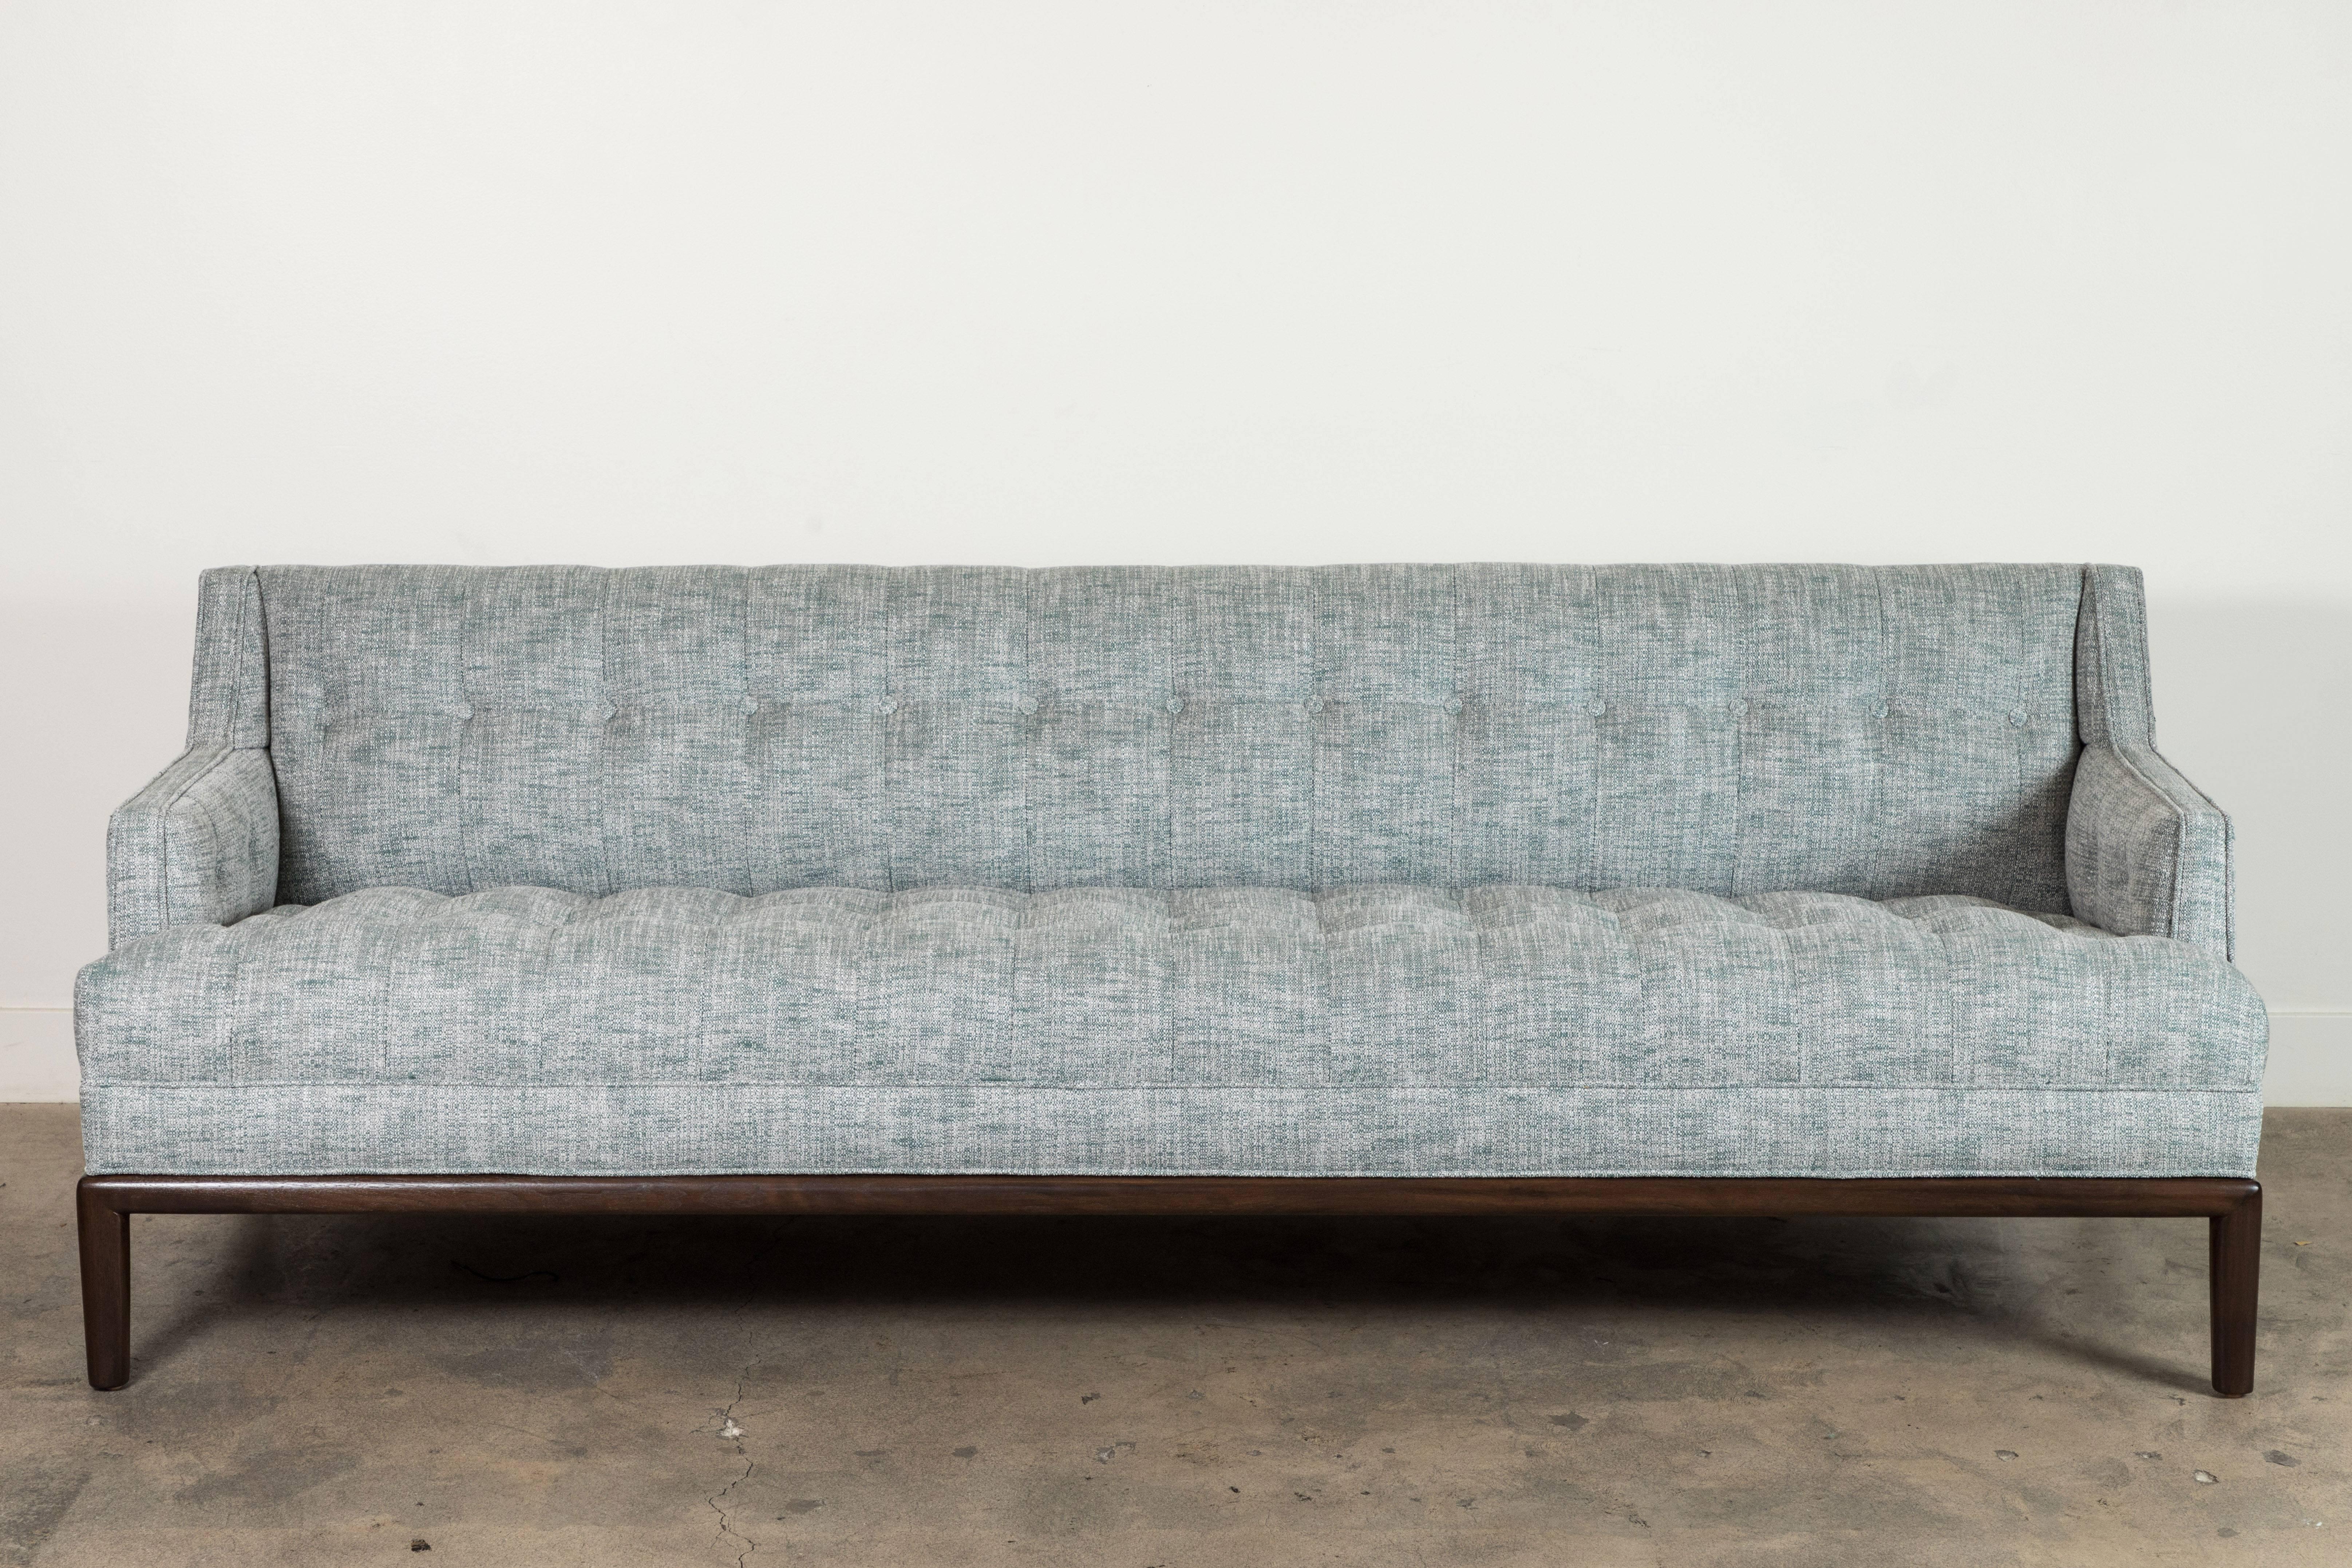 The Maurice Sofa is a midcentury inspired sofa with a tufted seat, back, and inner arms and piped details. The sofa rests atop a simple, rounded American walnut or white oak base.

Available to order in Customer's Own Material with a 6-8 week lead